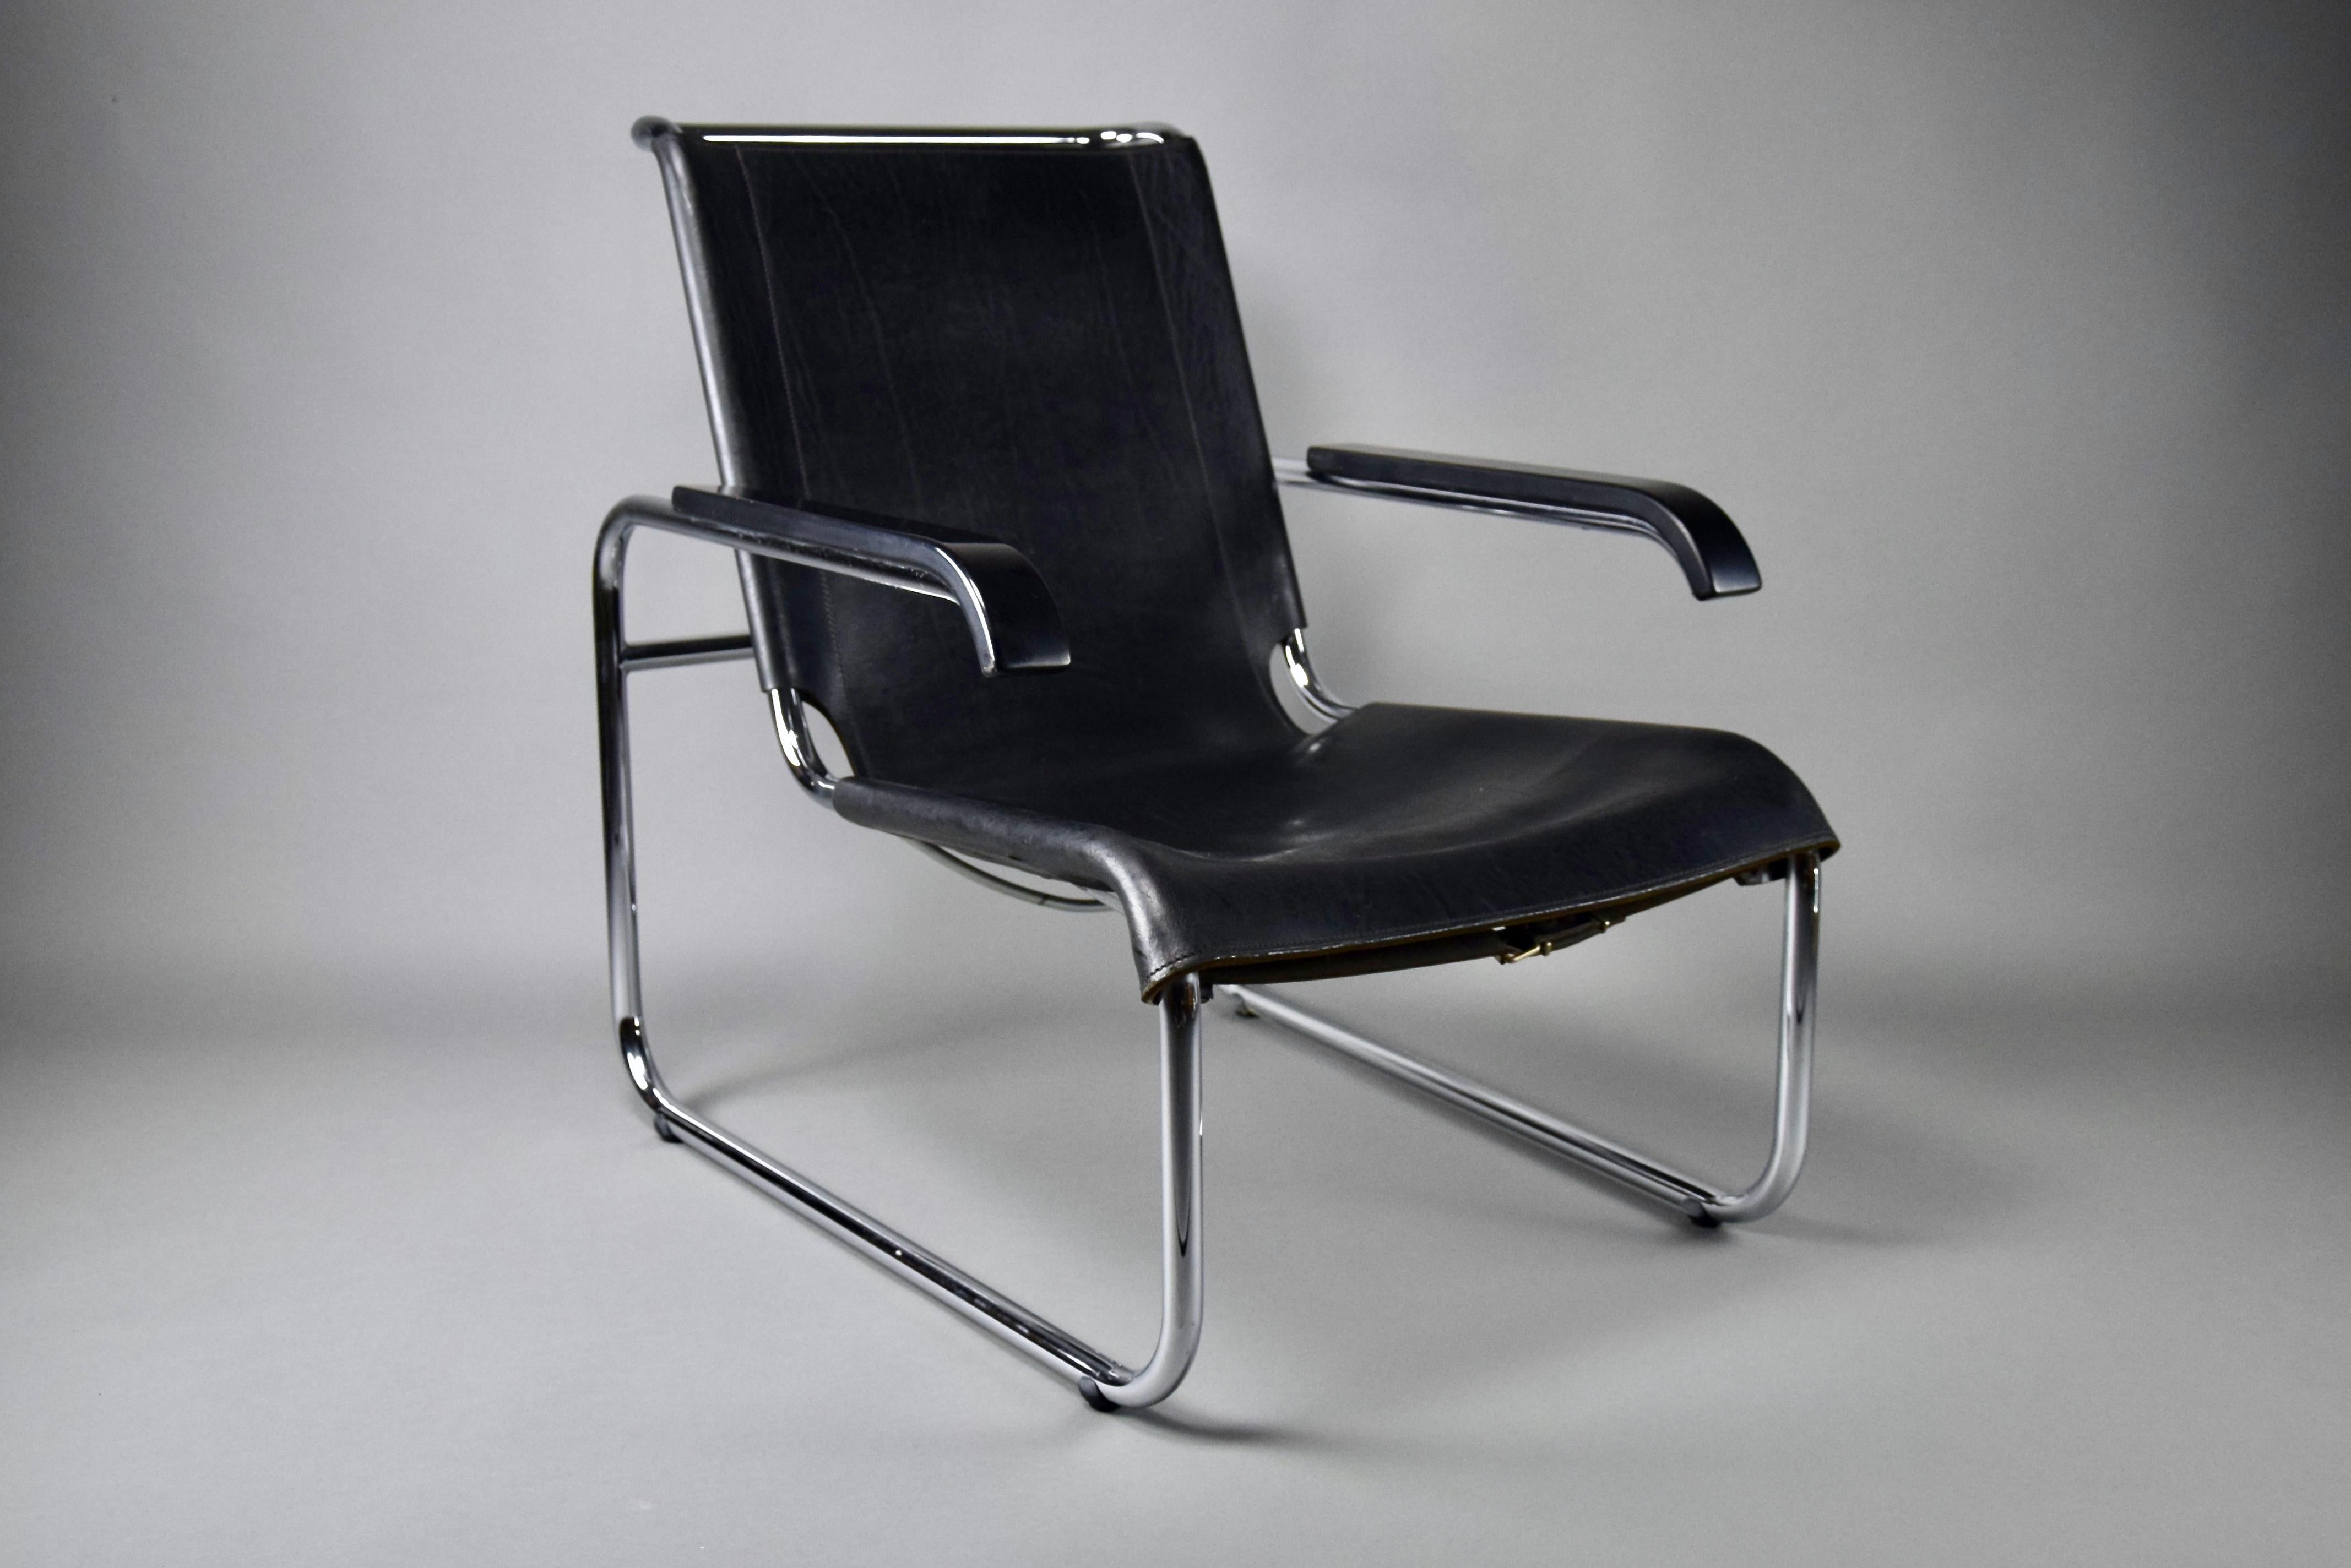 Beautiful B35 Lounge chair from the first owner who bought them in the early 1970's. The armrests and chrome plated tubular frame has been polished and the leather has been treated with leather polish. The chairs are in great vintage condition as